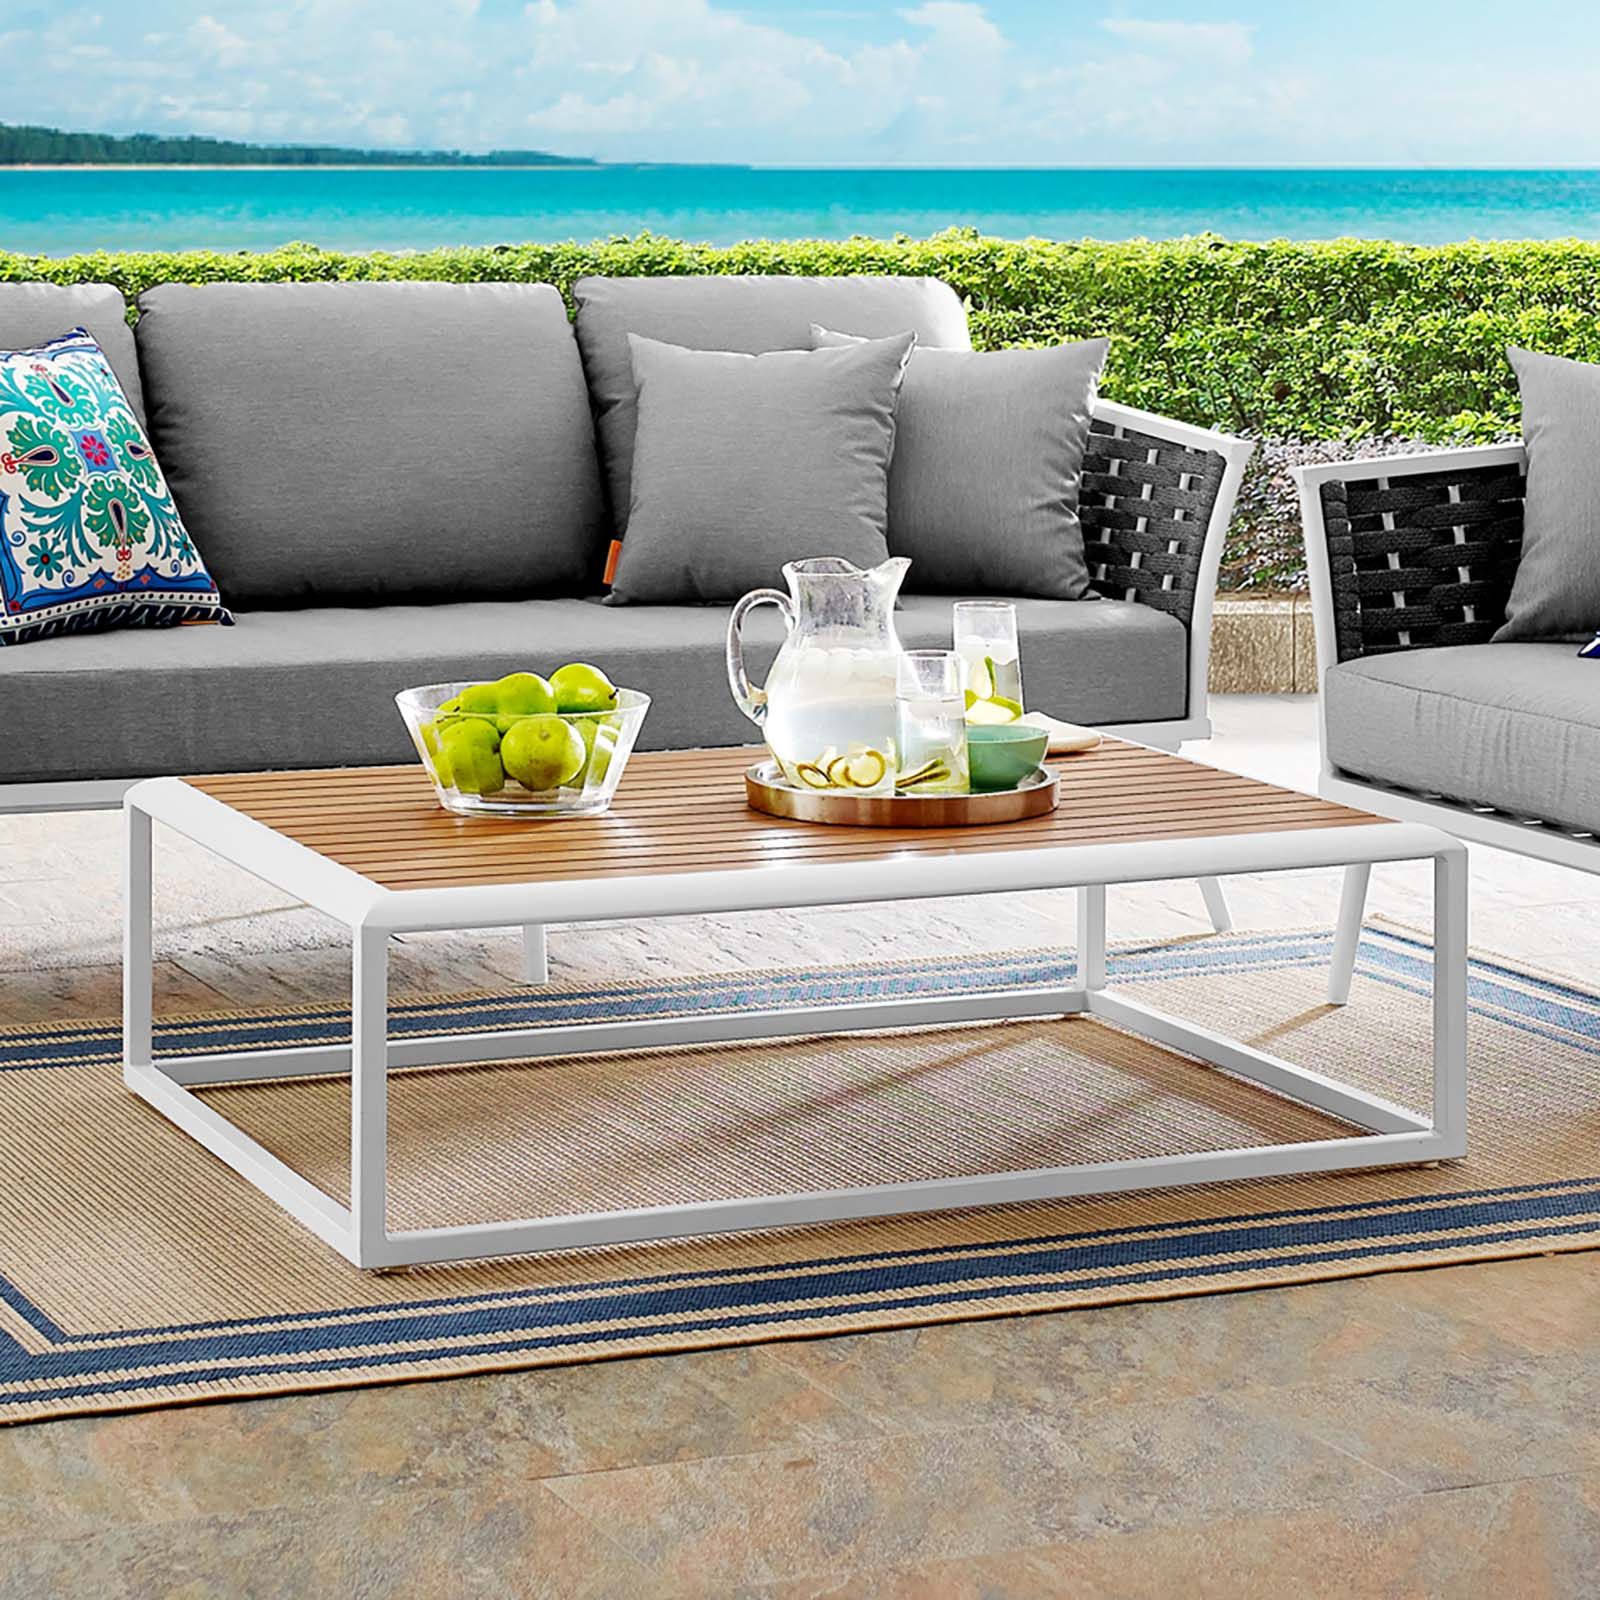 Modterior :: Outdoor :: Coffee Tables :: Stance Outdoor Patio Aluminum Inside Modern Outdoor Patio Coffee Tables (View 5 of 20)